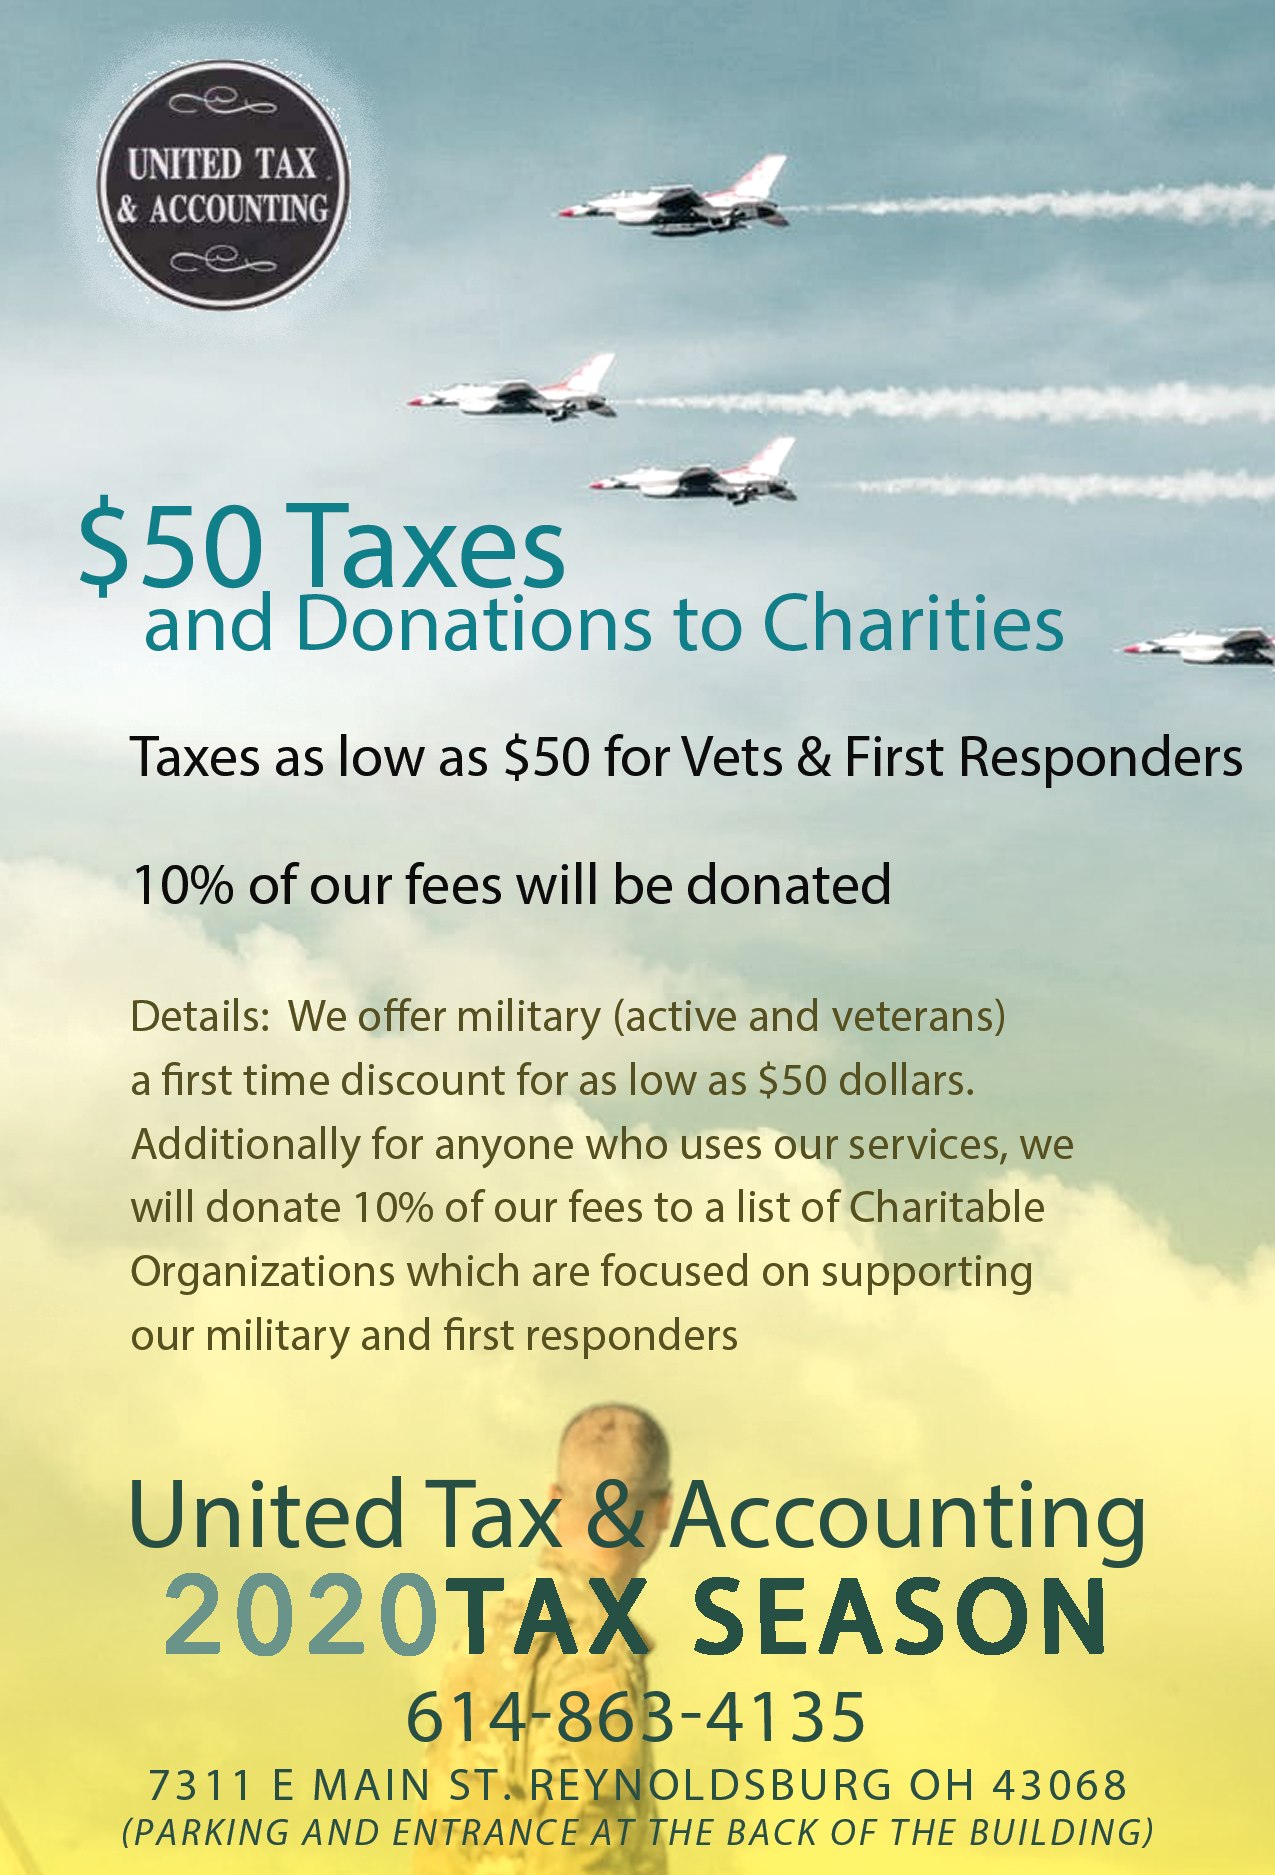 United Tax & Accounting Services